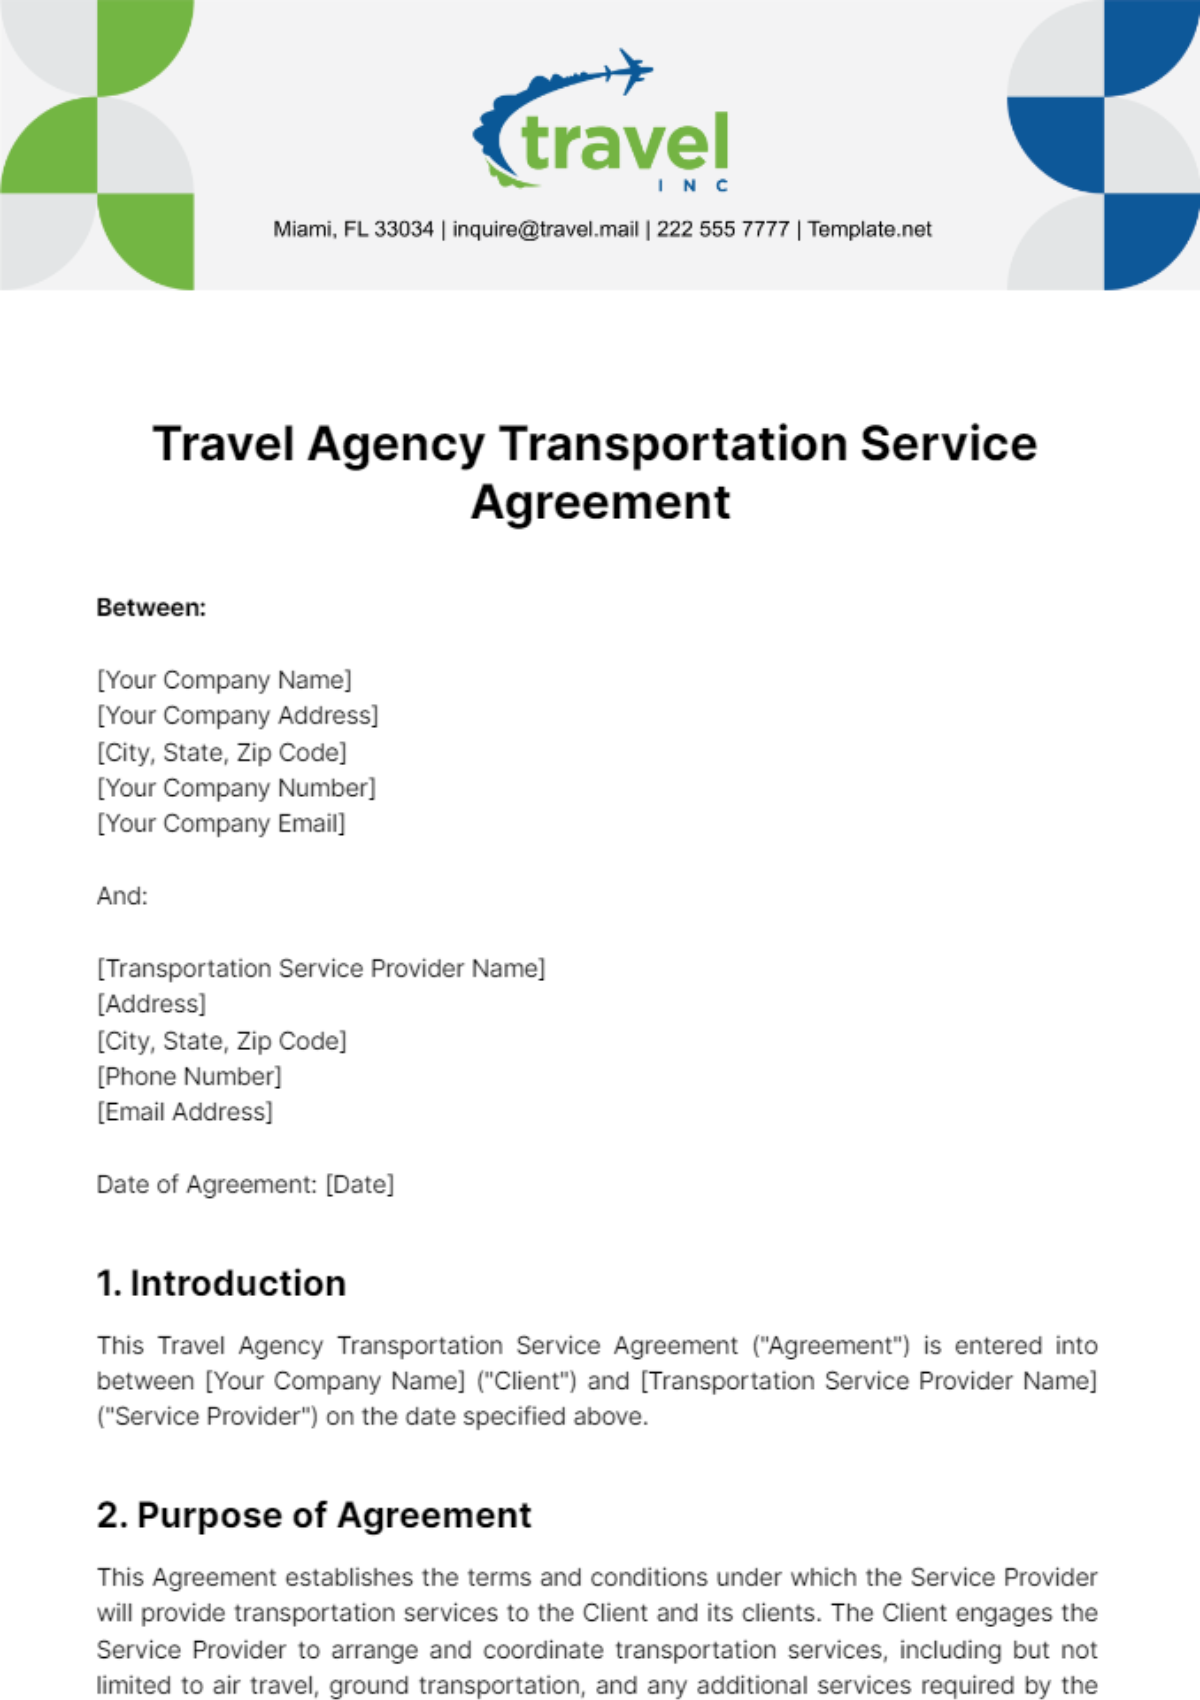 Free Travel Agency Transportation Service Agreement Template